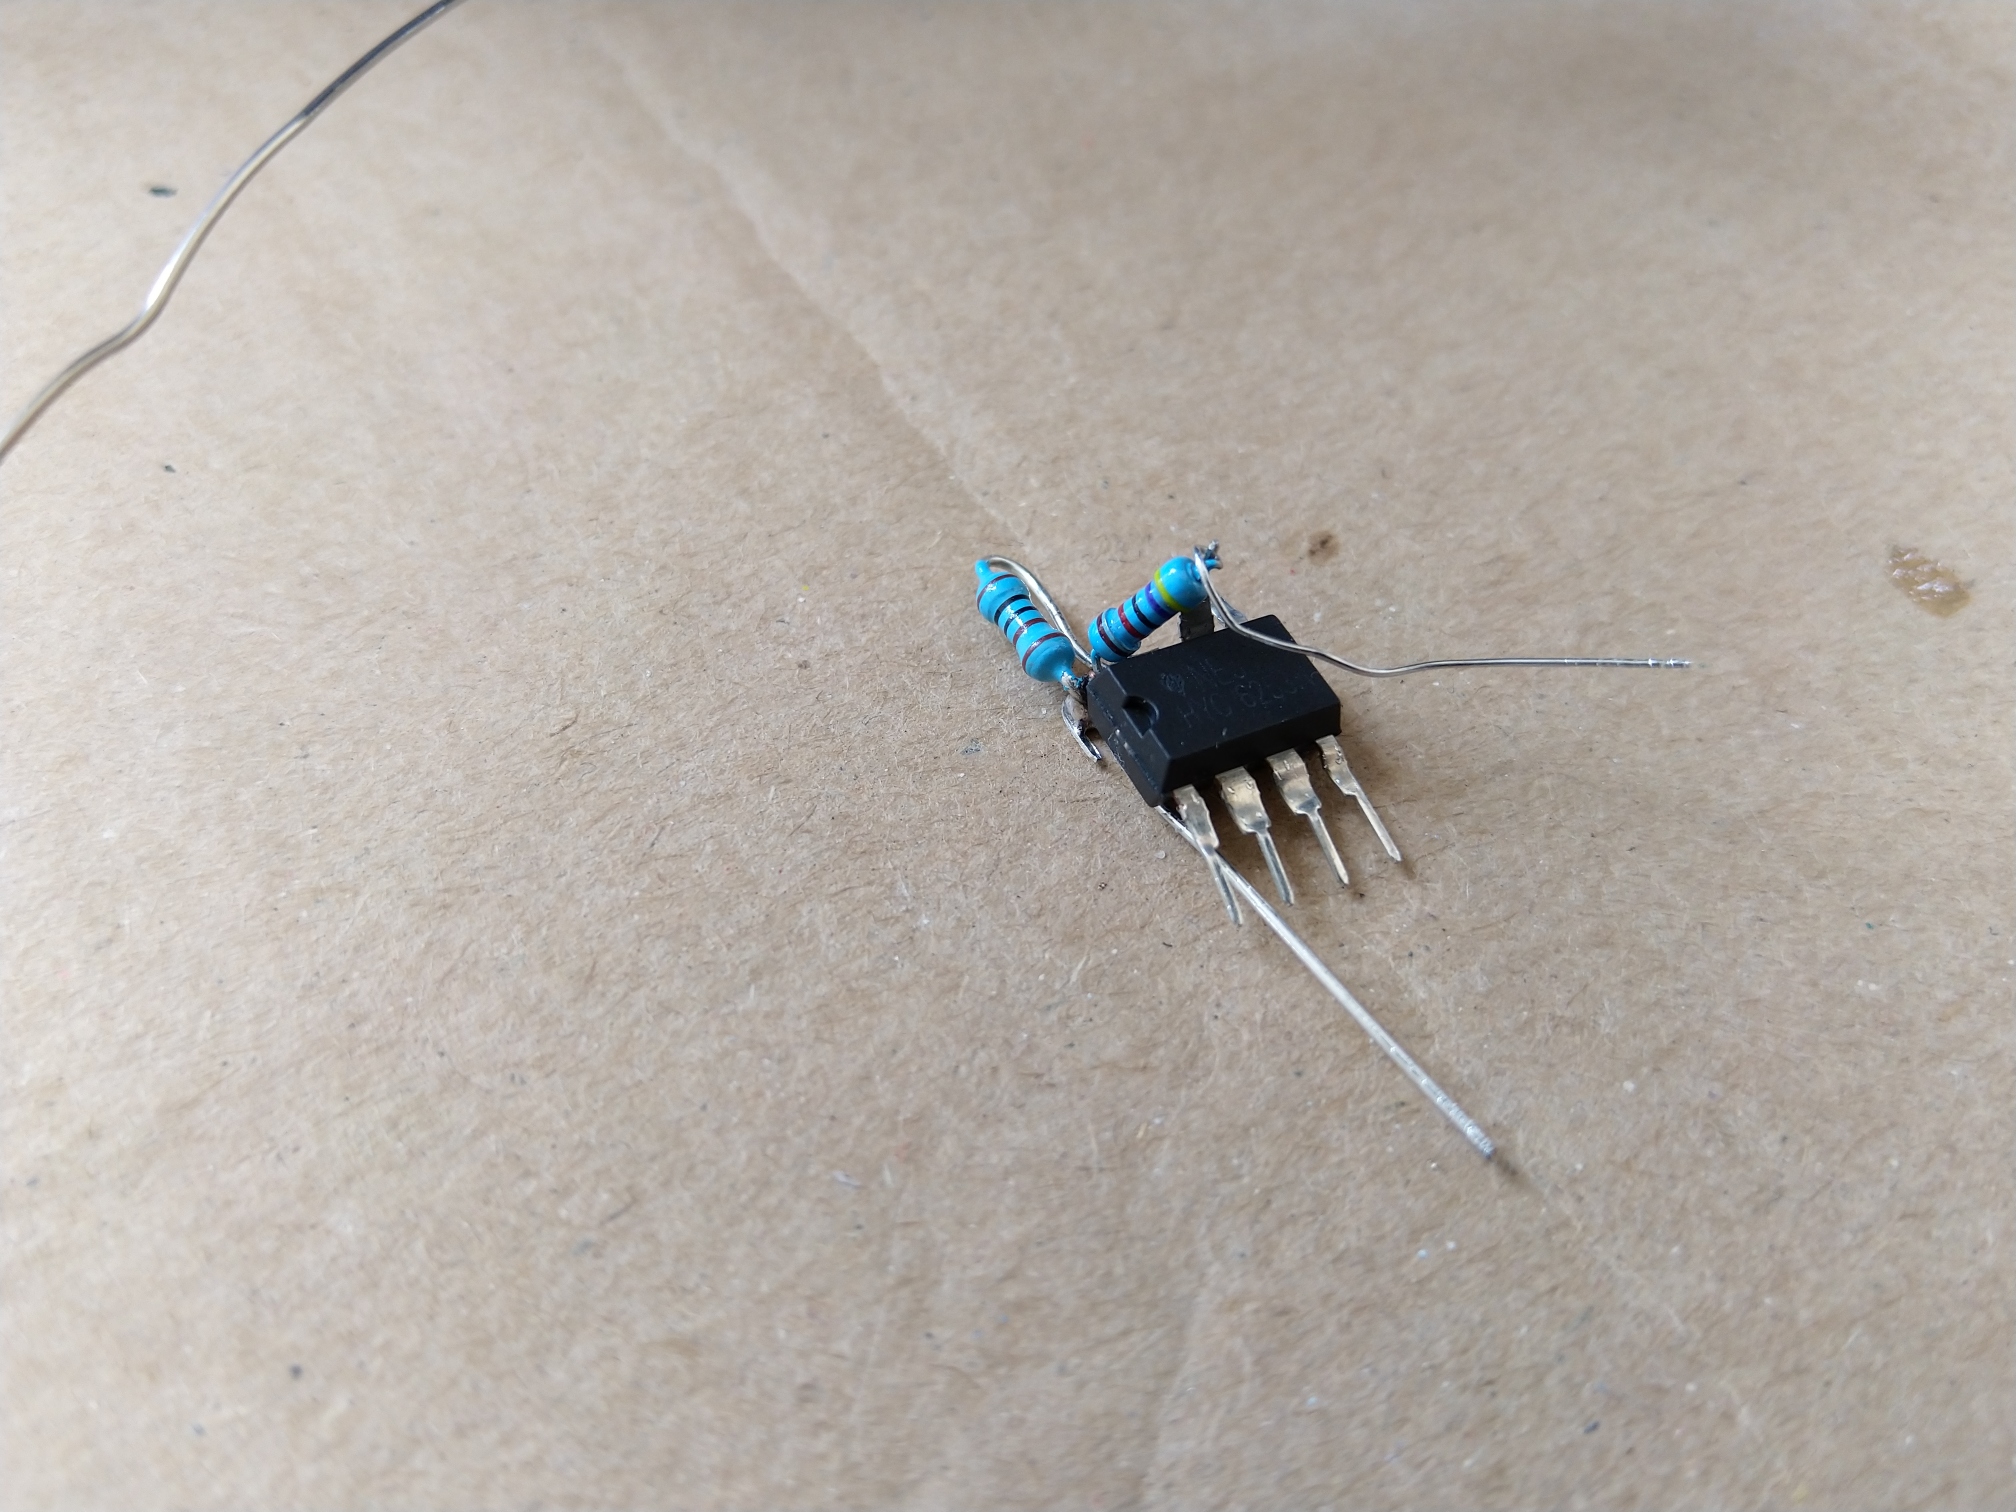 Putting together astable circuit - resistors.